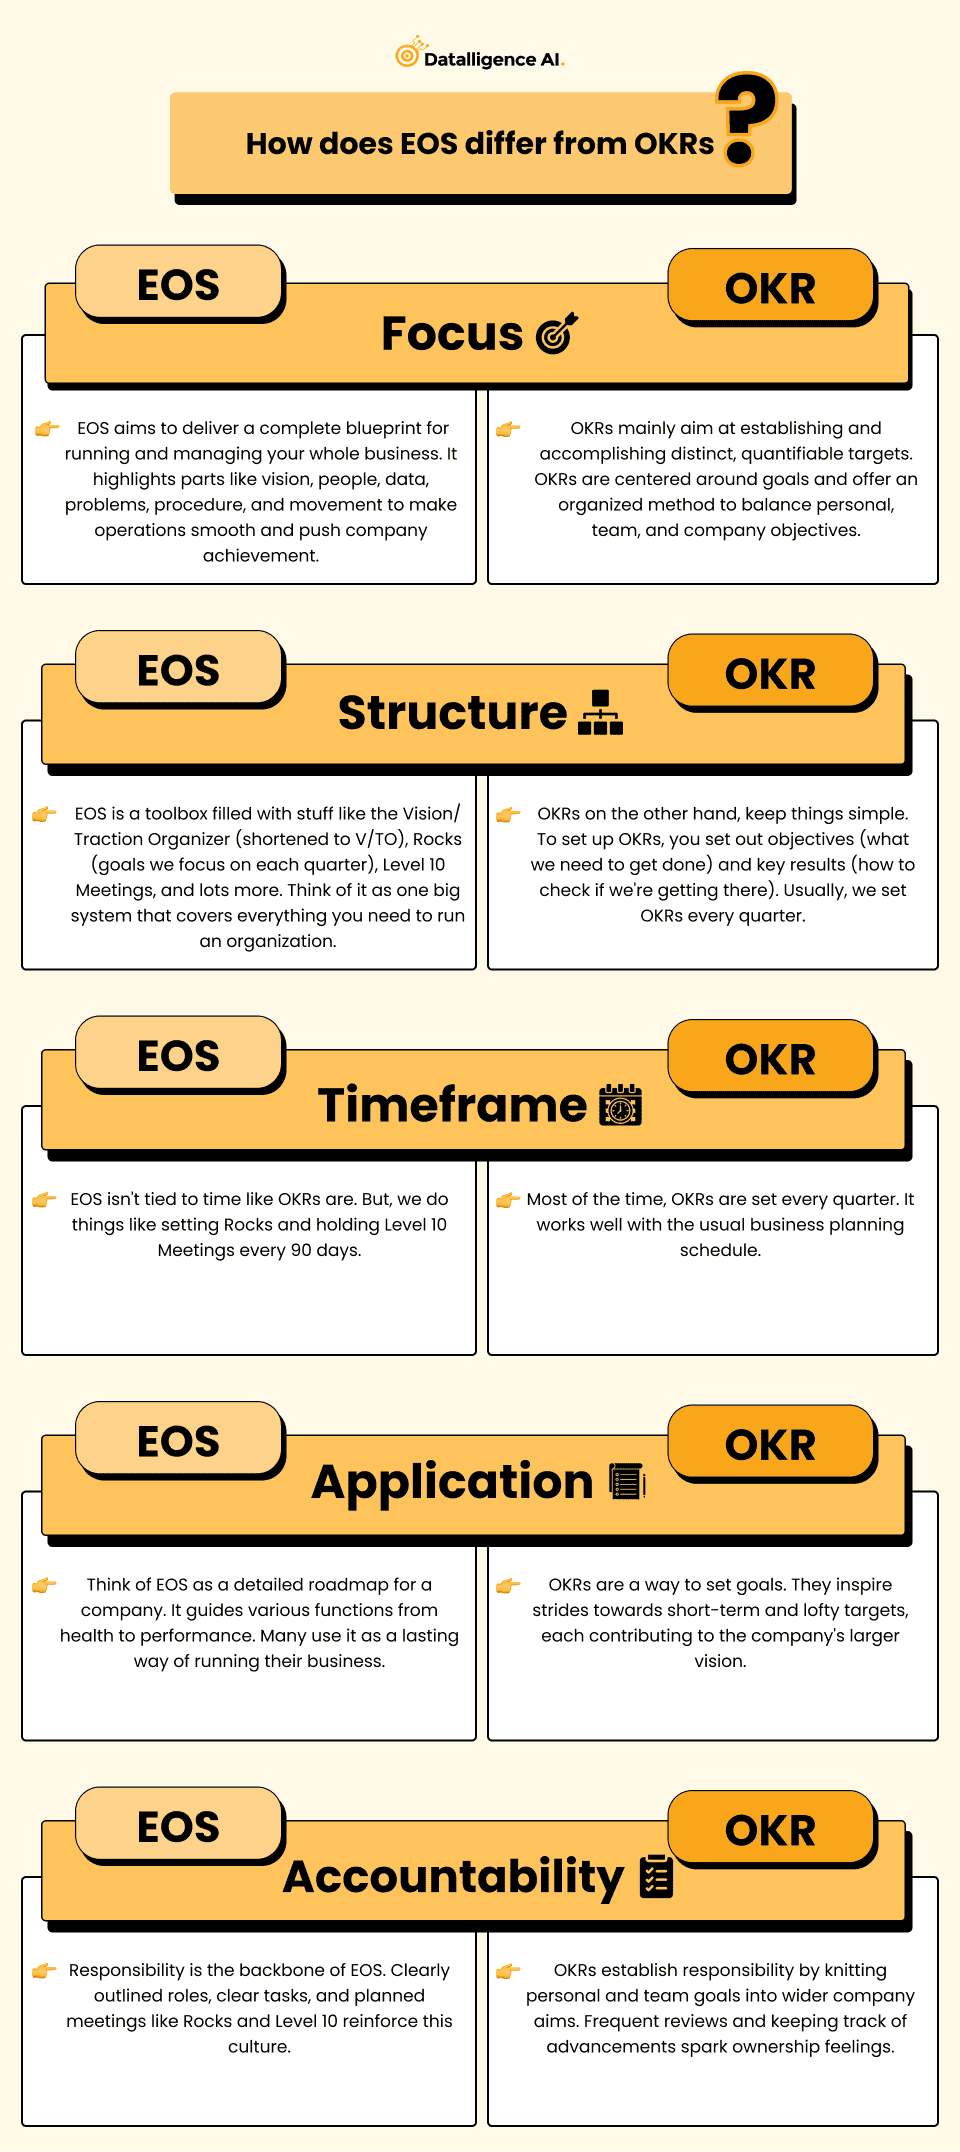 How Does EOS Differ from OKRs